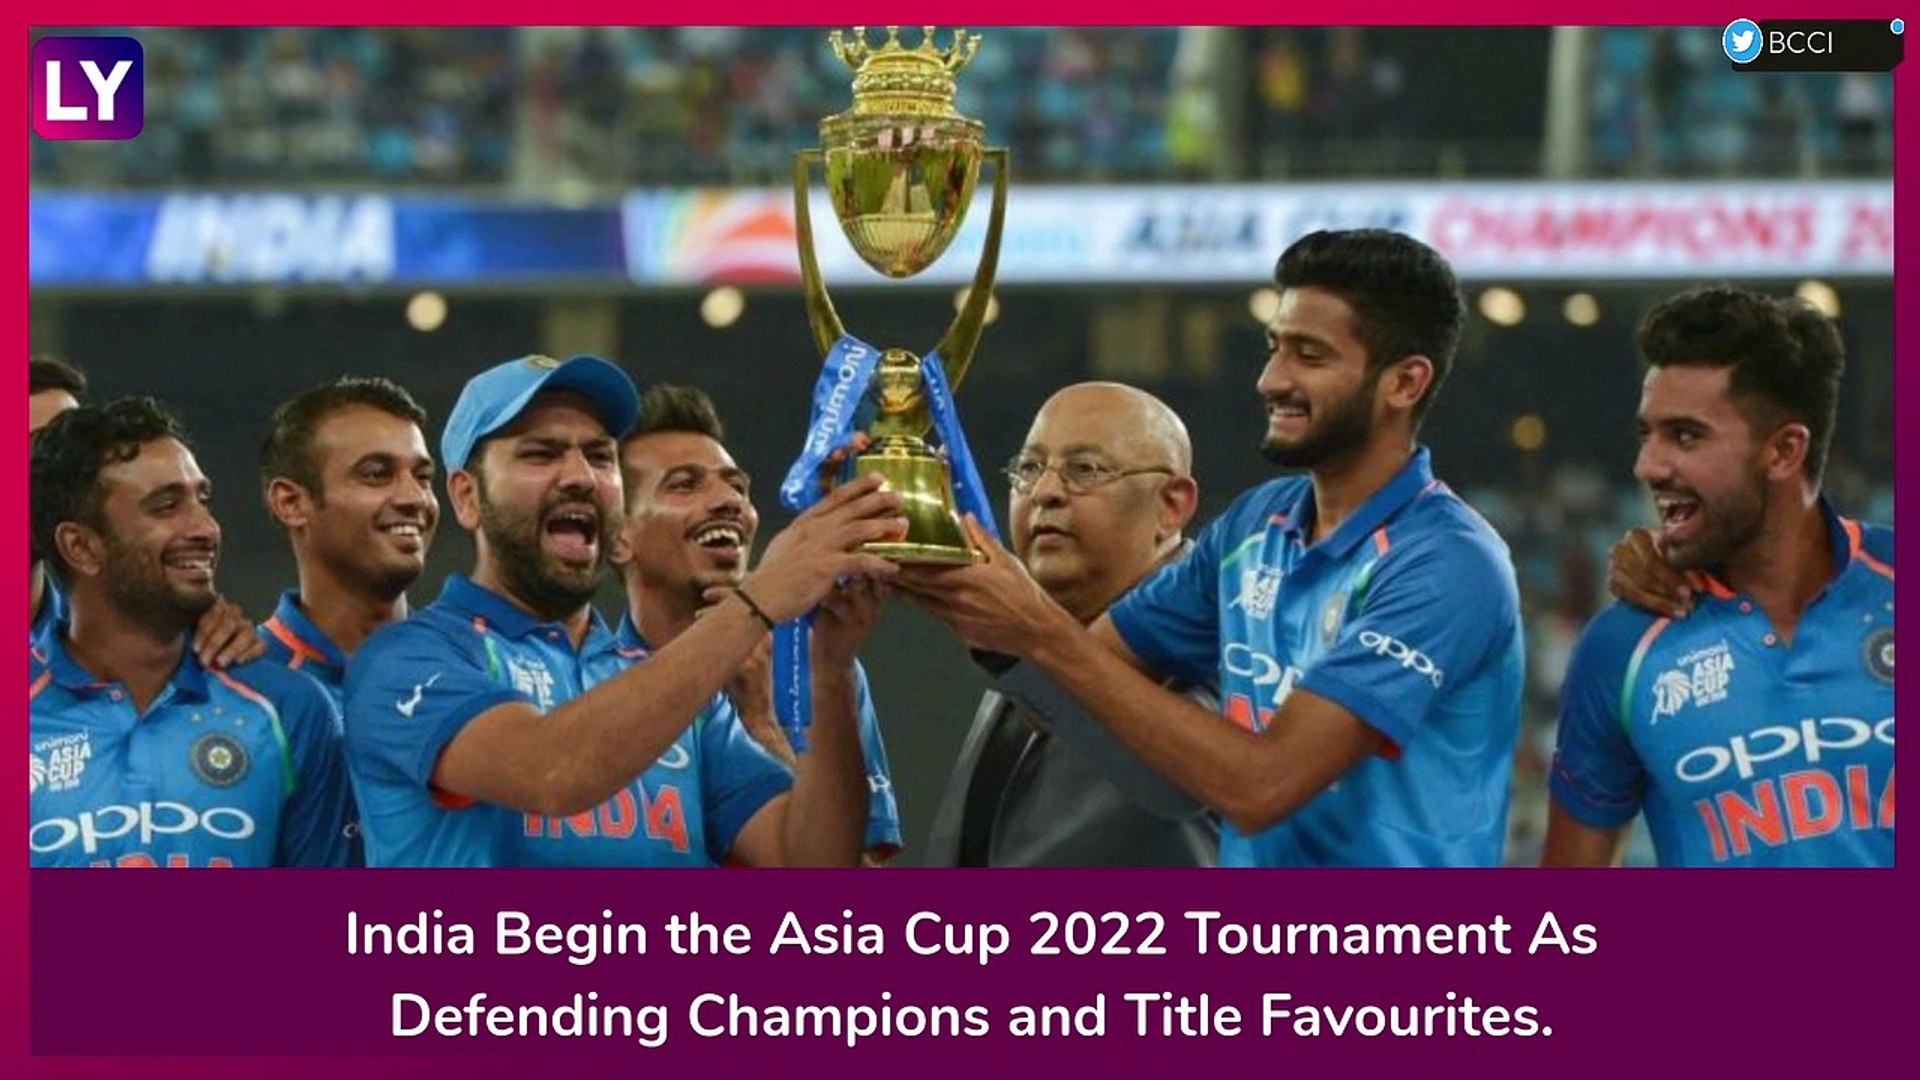 IND vs PAK, Asia Cup 2022 Preview & Playing XI: India Aim at Winning Start Against Archrivals